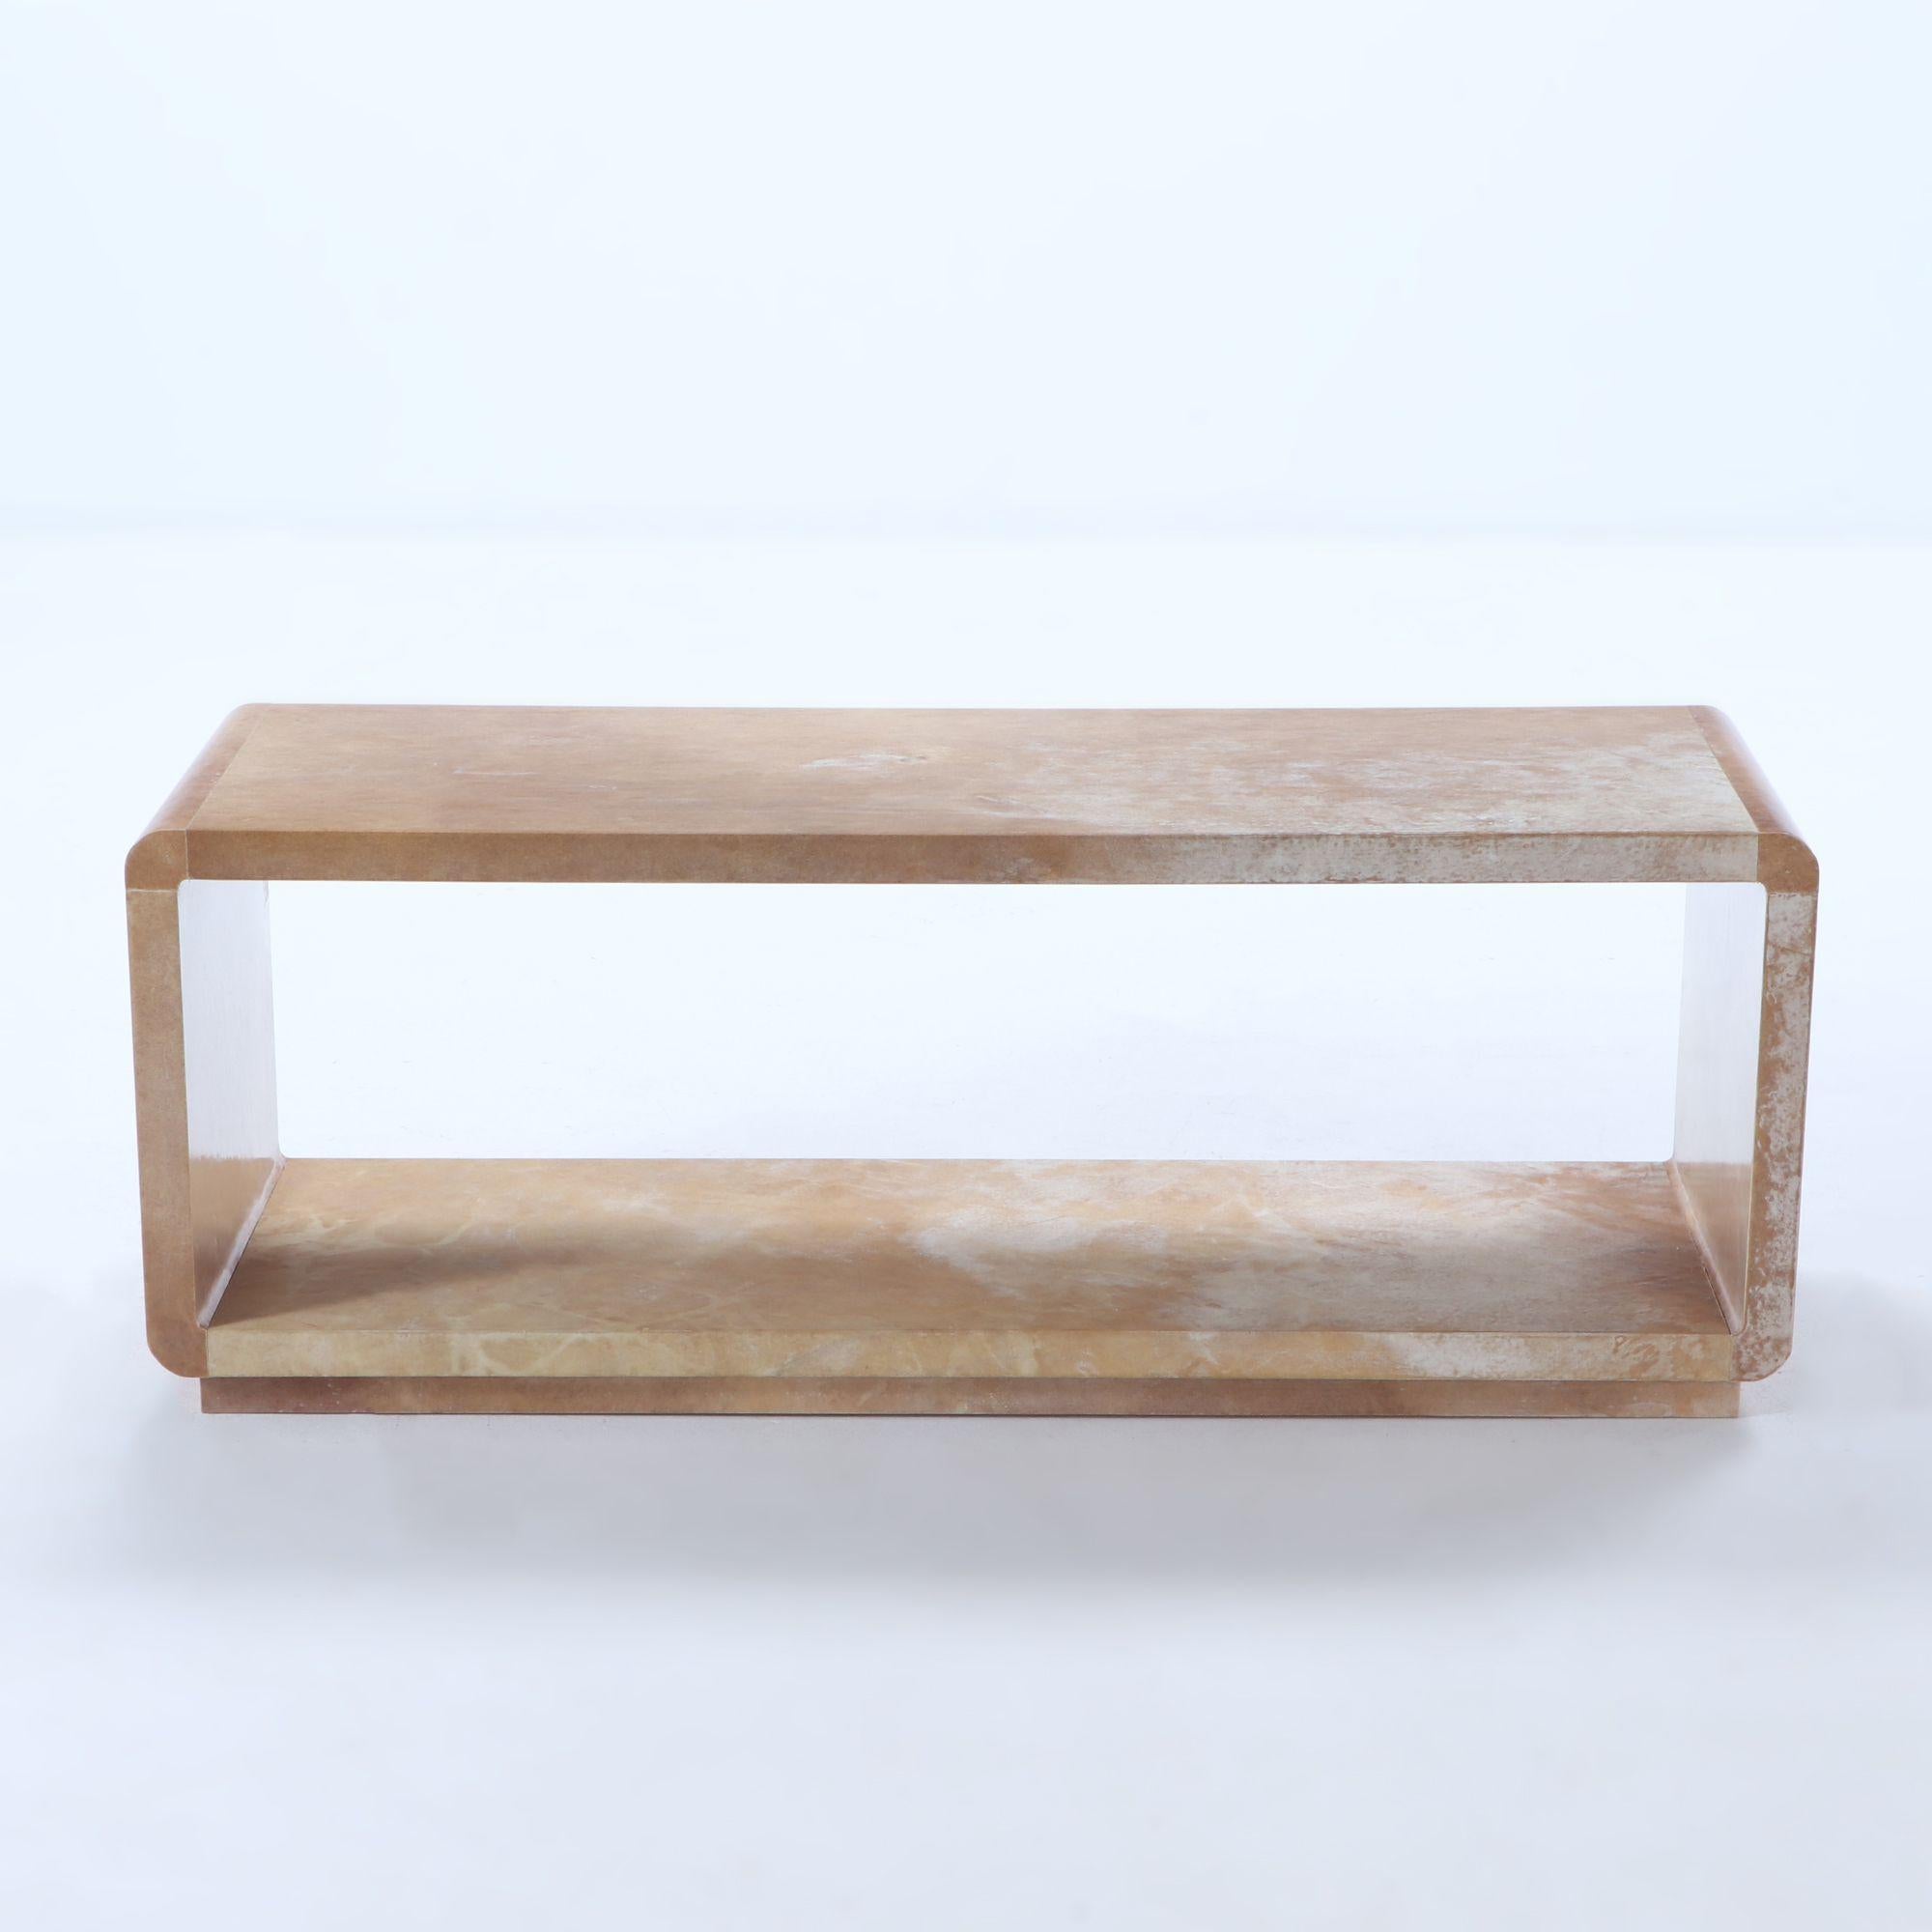 Parchment covered bench or coffee table with rounded corners done in an interesting brownish cream parchment.